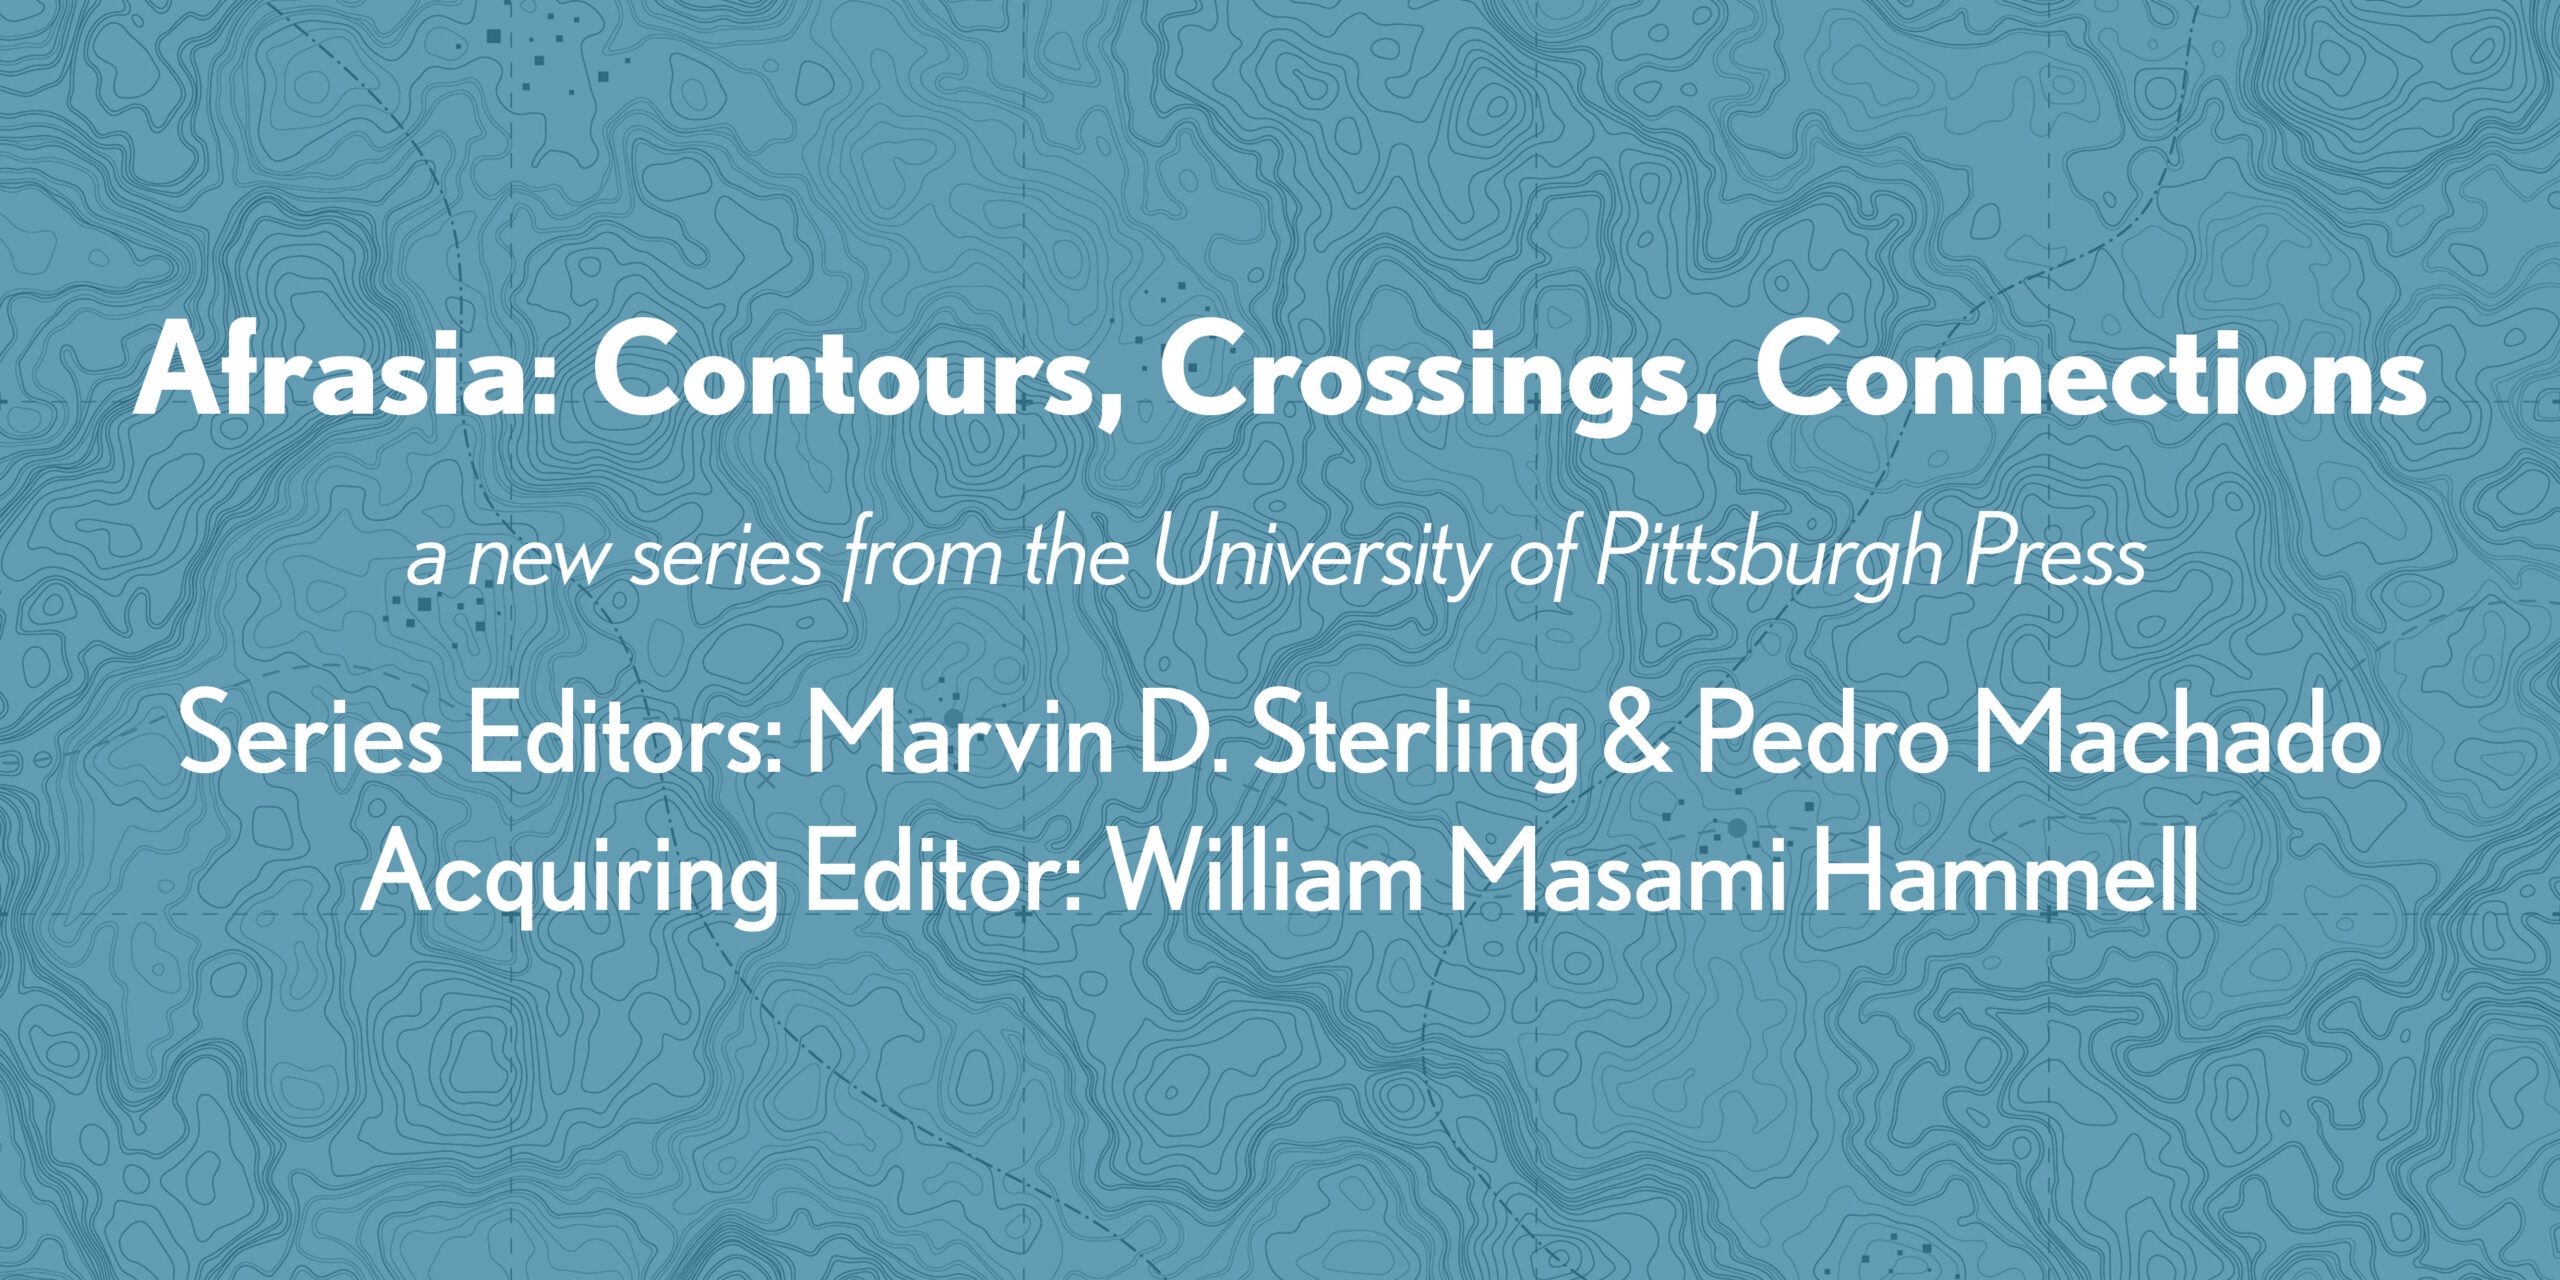 UPP Announces New Scholarly Series: Afrasia: Contours, Crossings, Connections